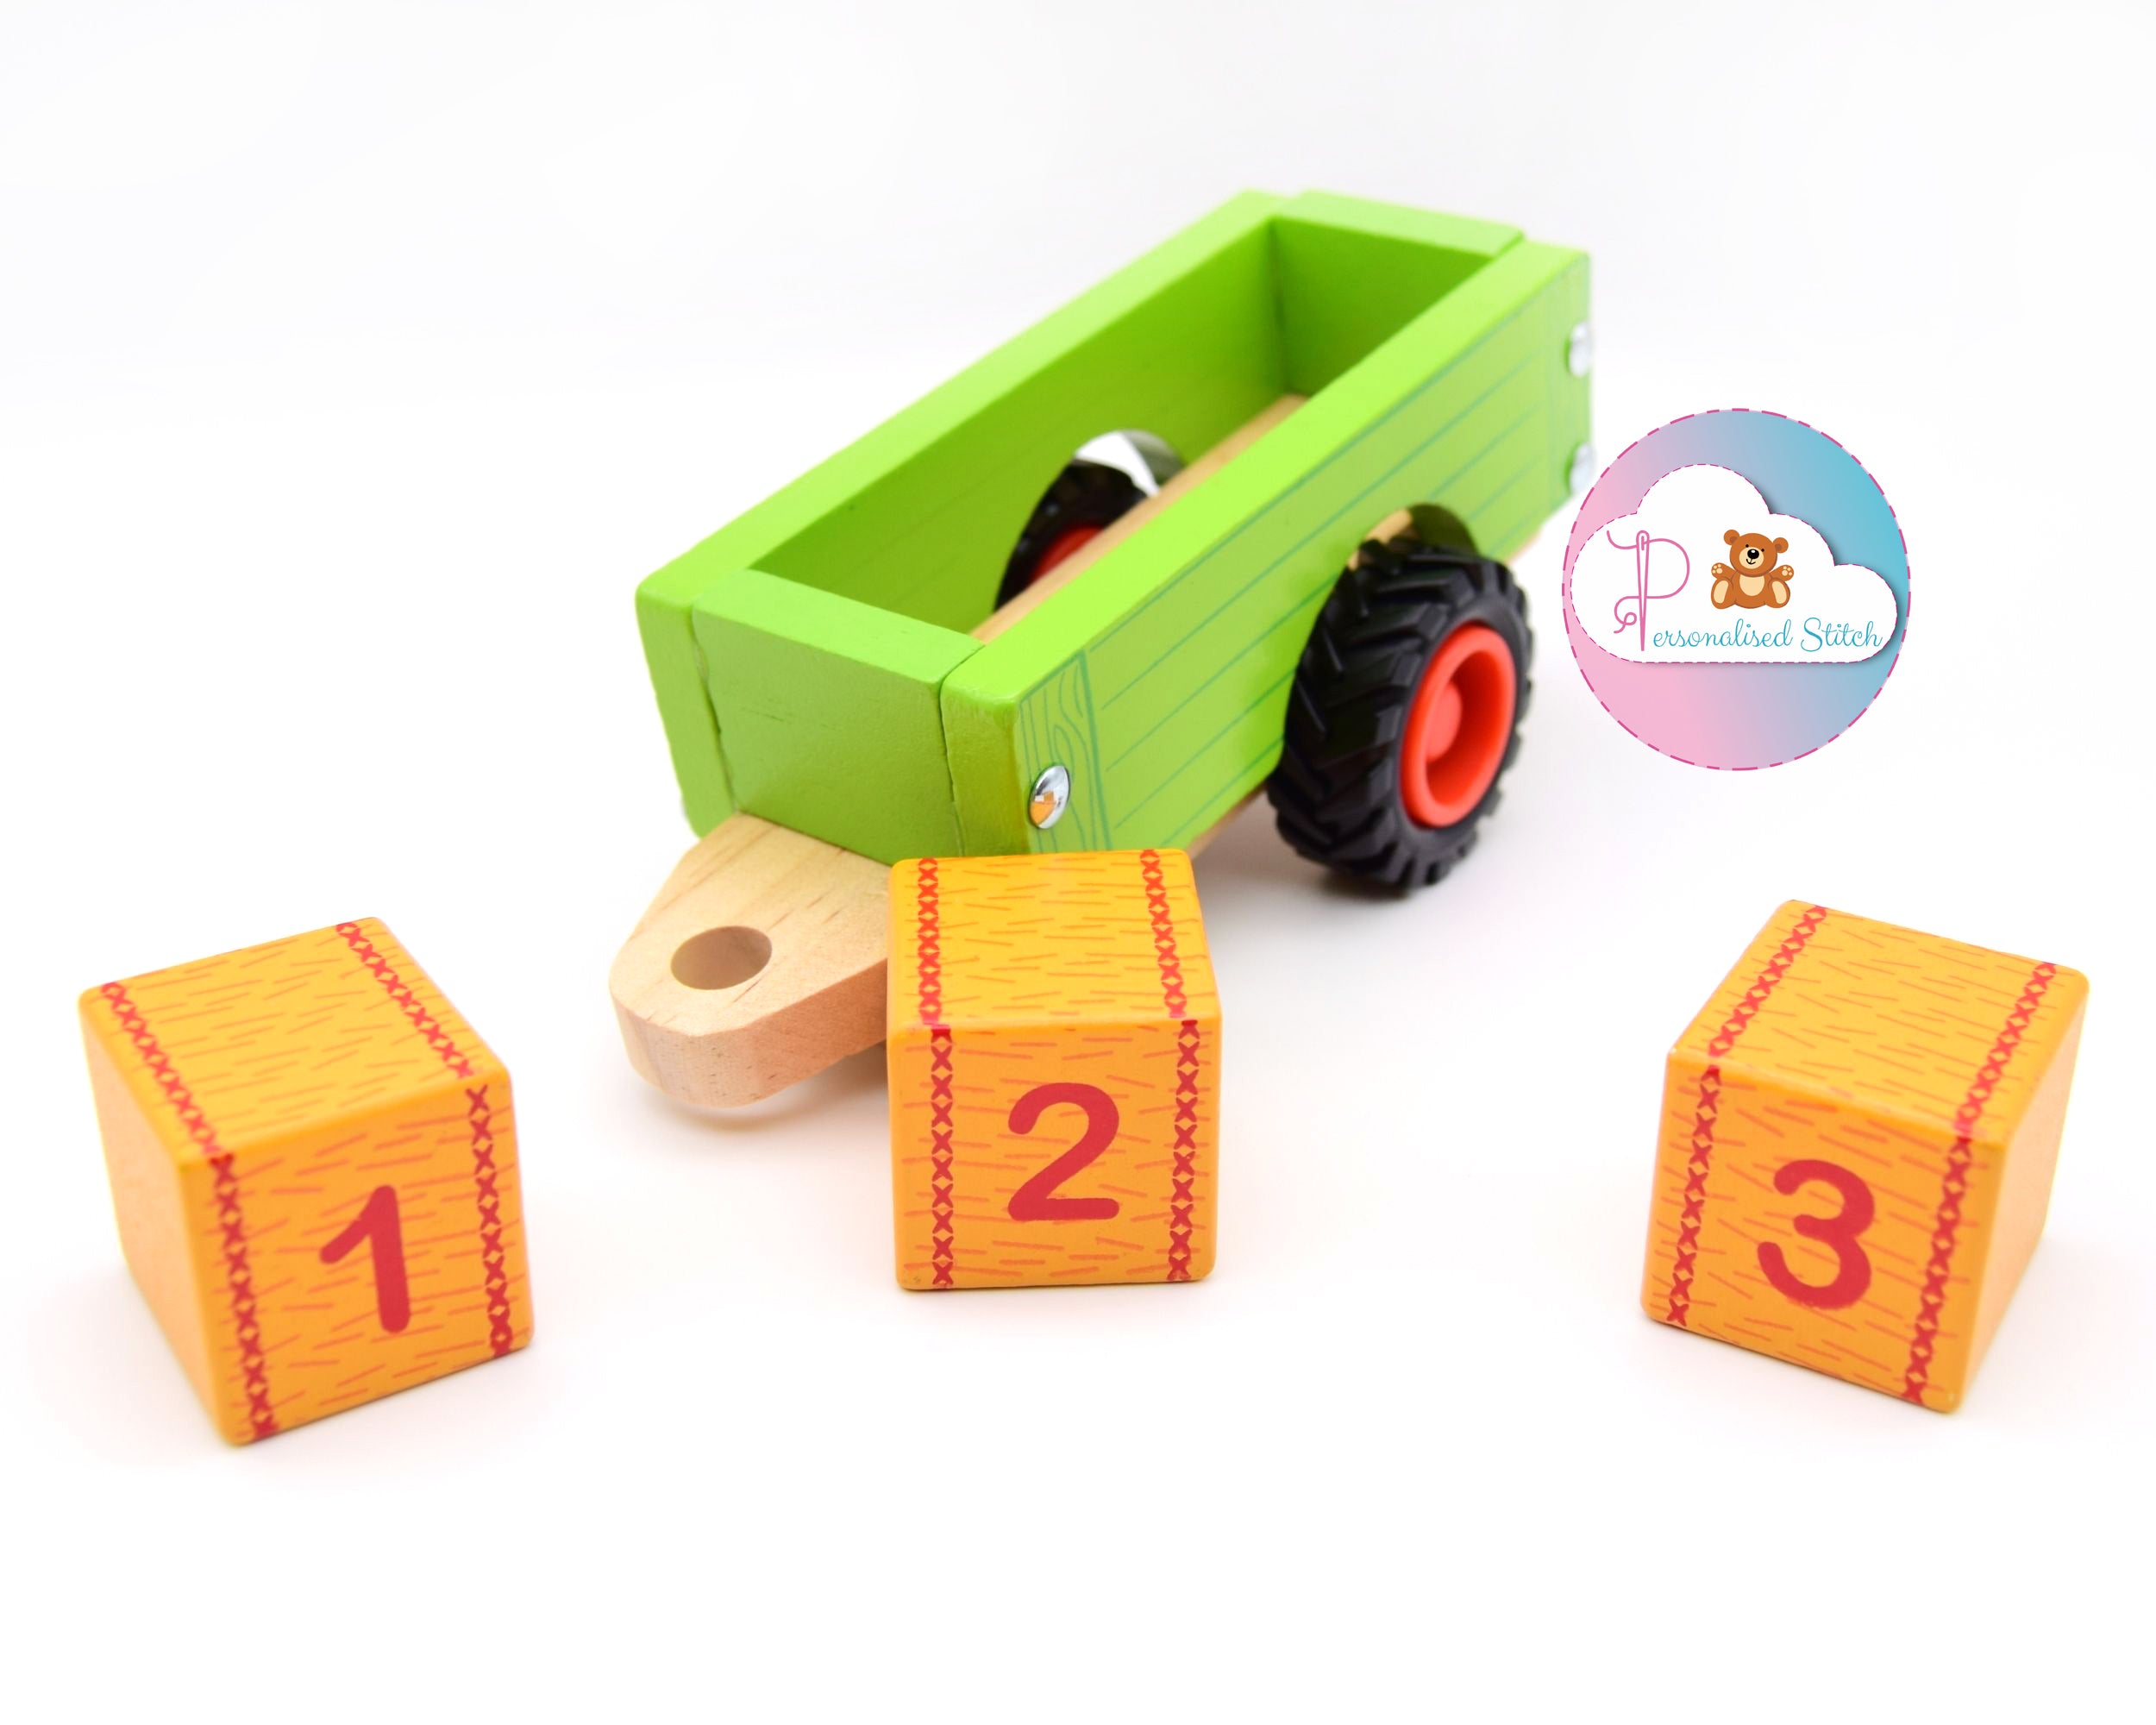 personalised wooden toy tractor set with hay bales